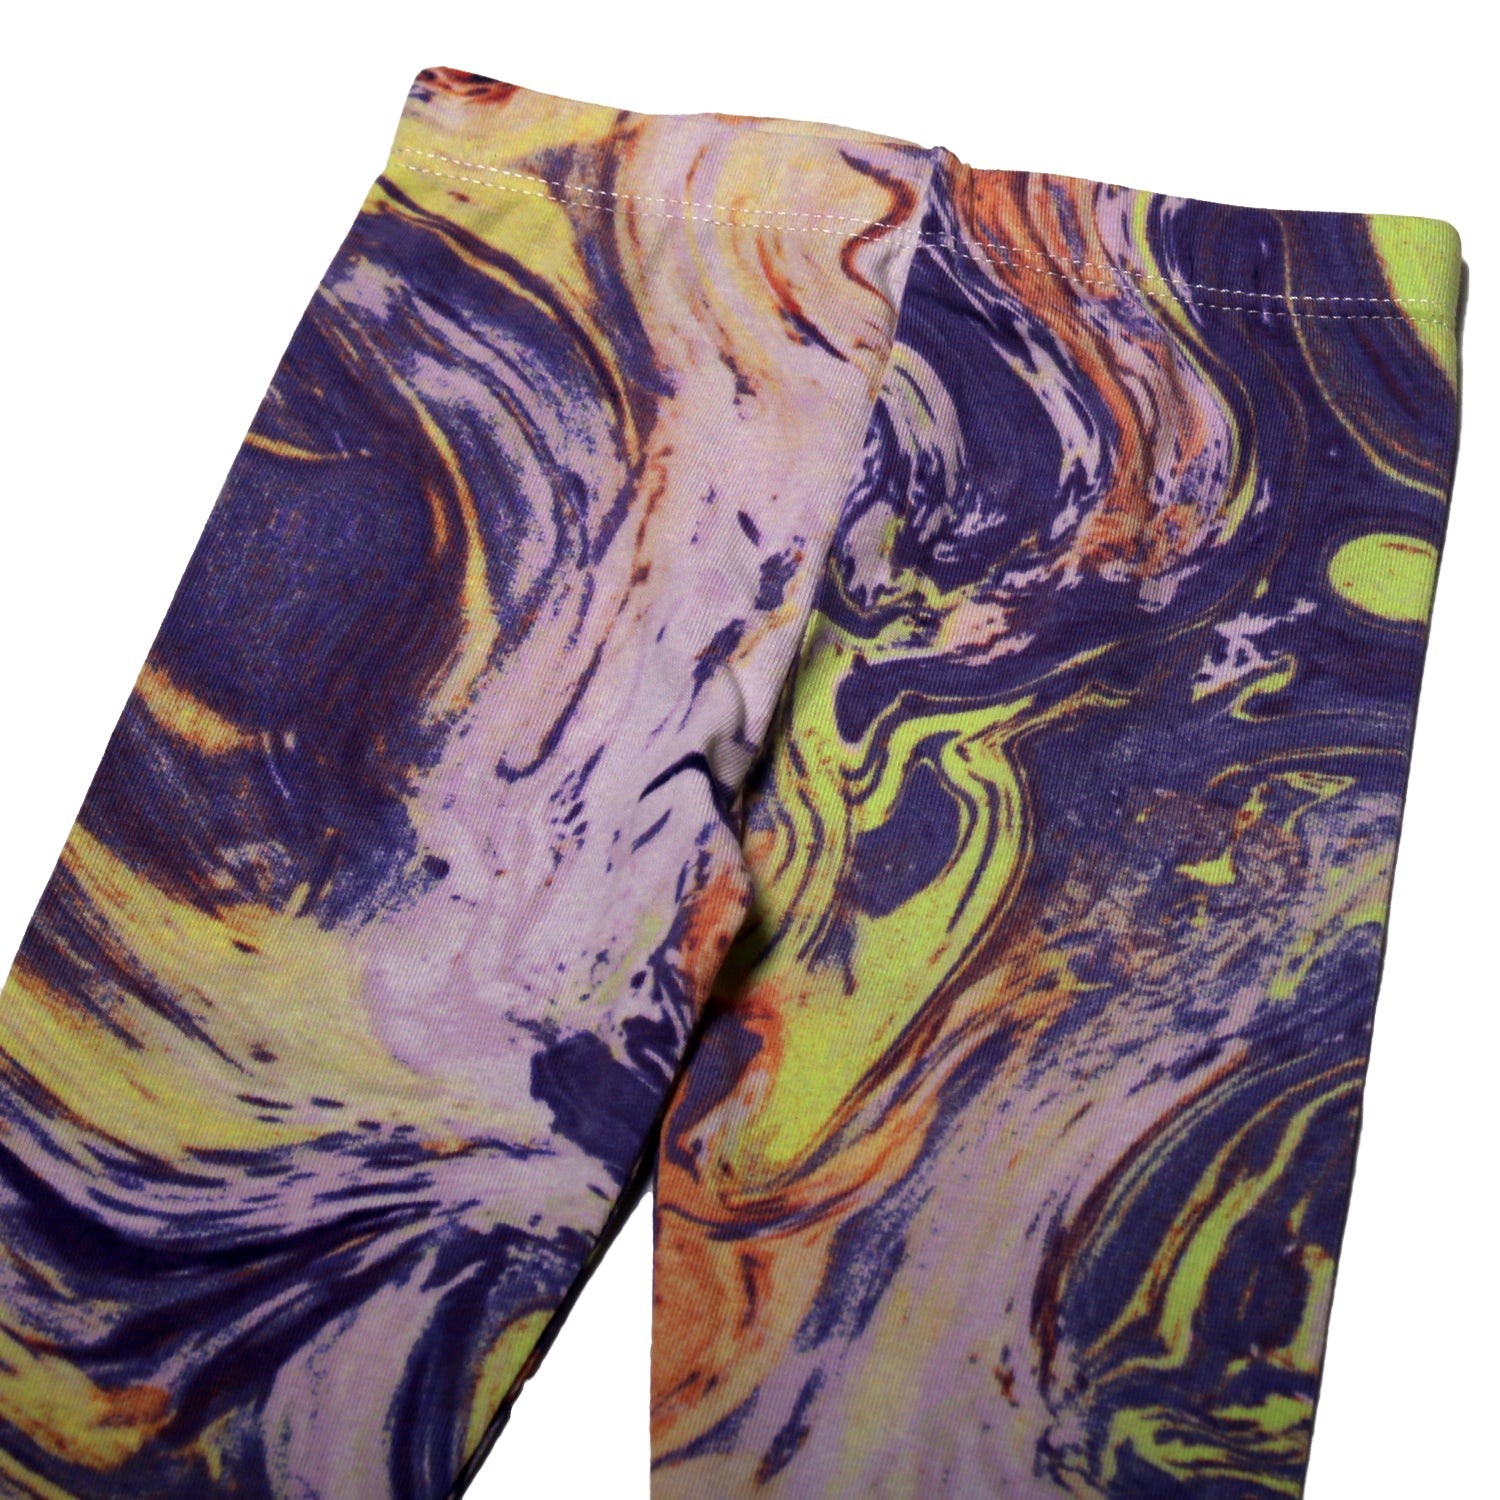 NEW MULTICOLOR SPLASH PRINTED TIGHTS FOR GIRLS